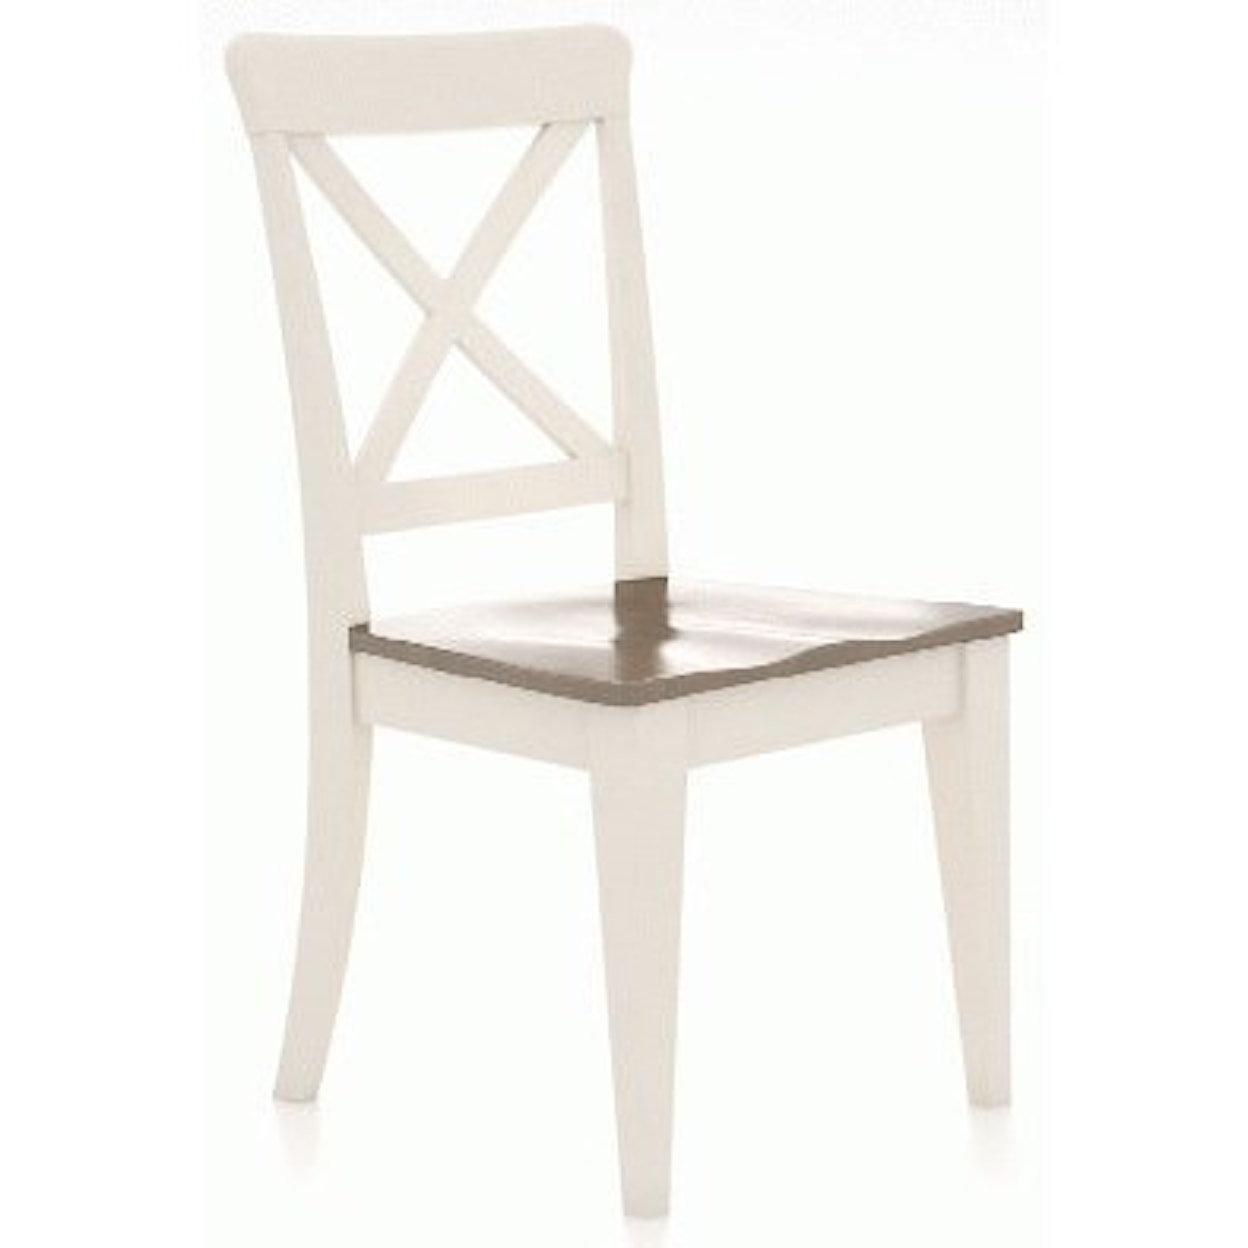 Canadel Gourmet Customizable Petite X-Back Side Chair